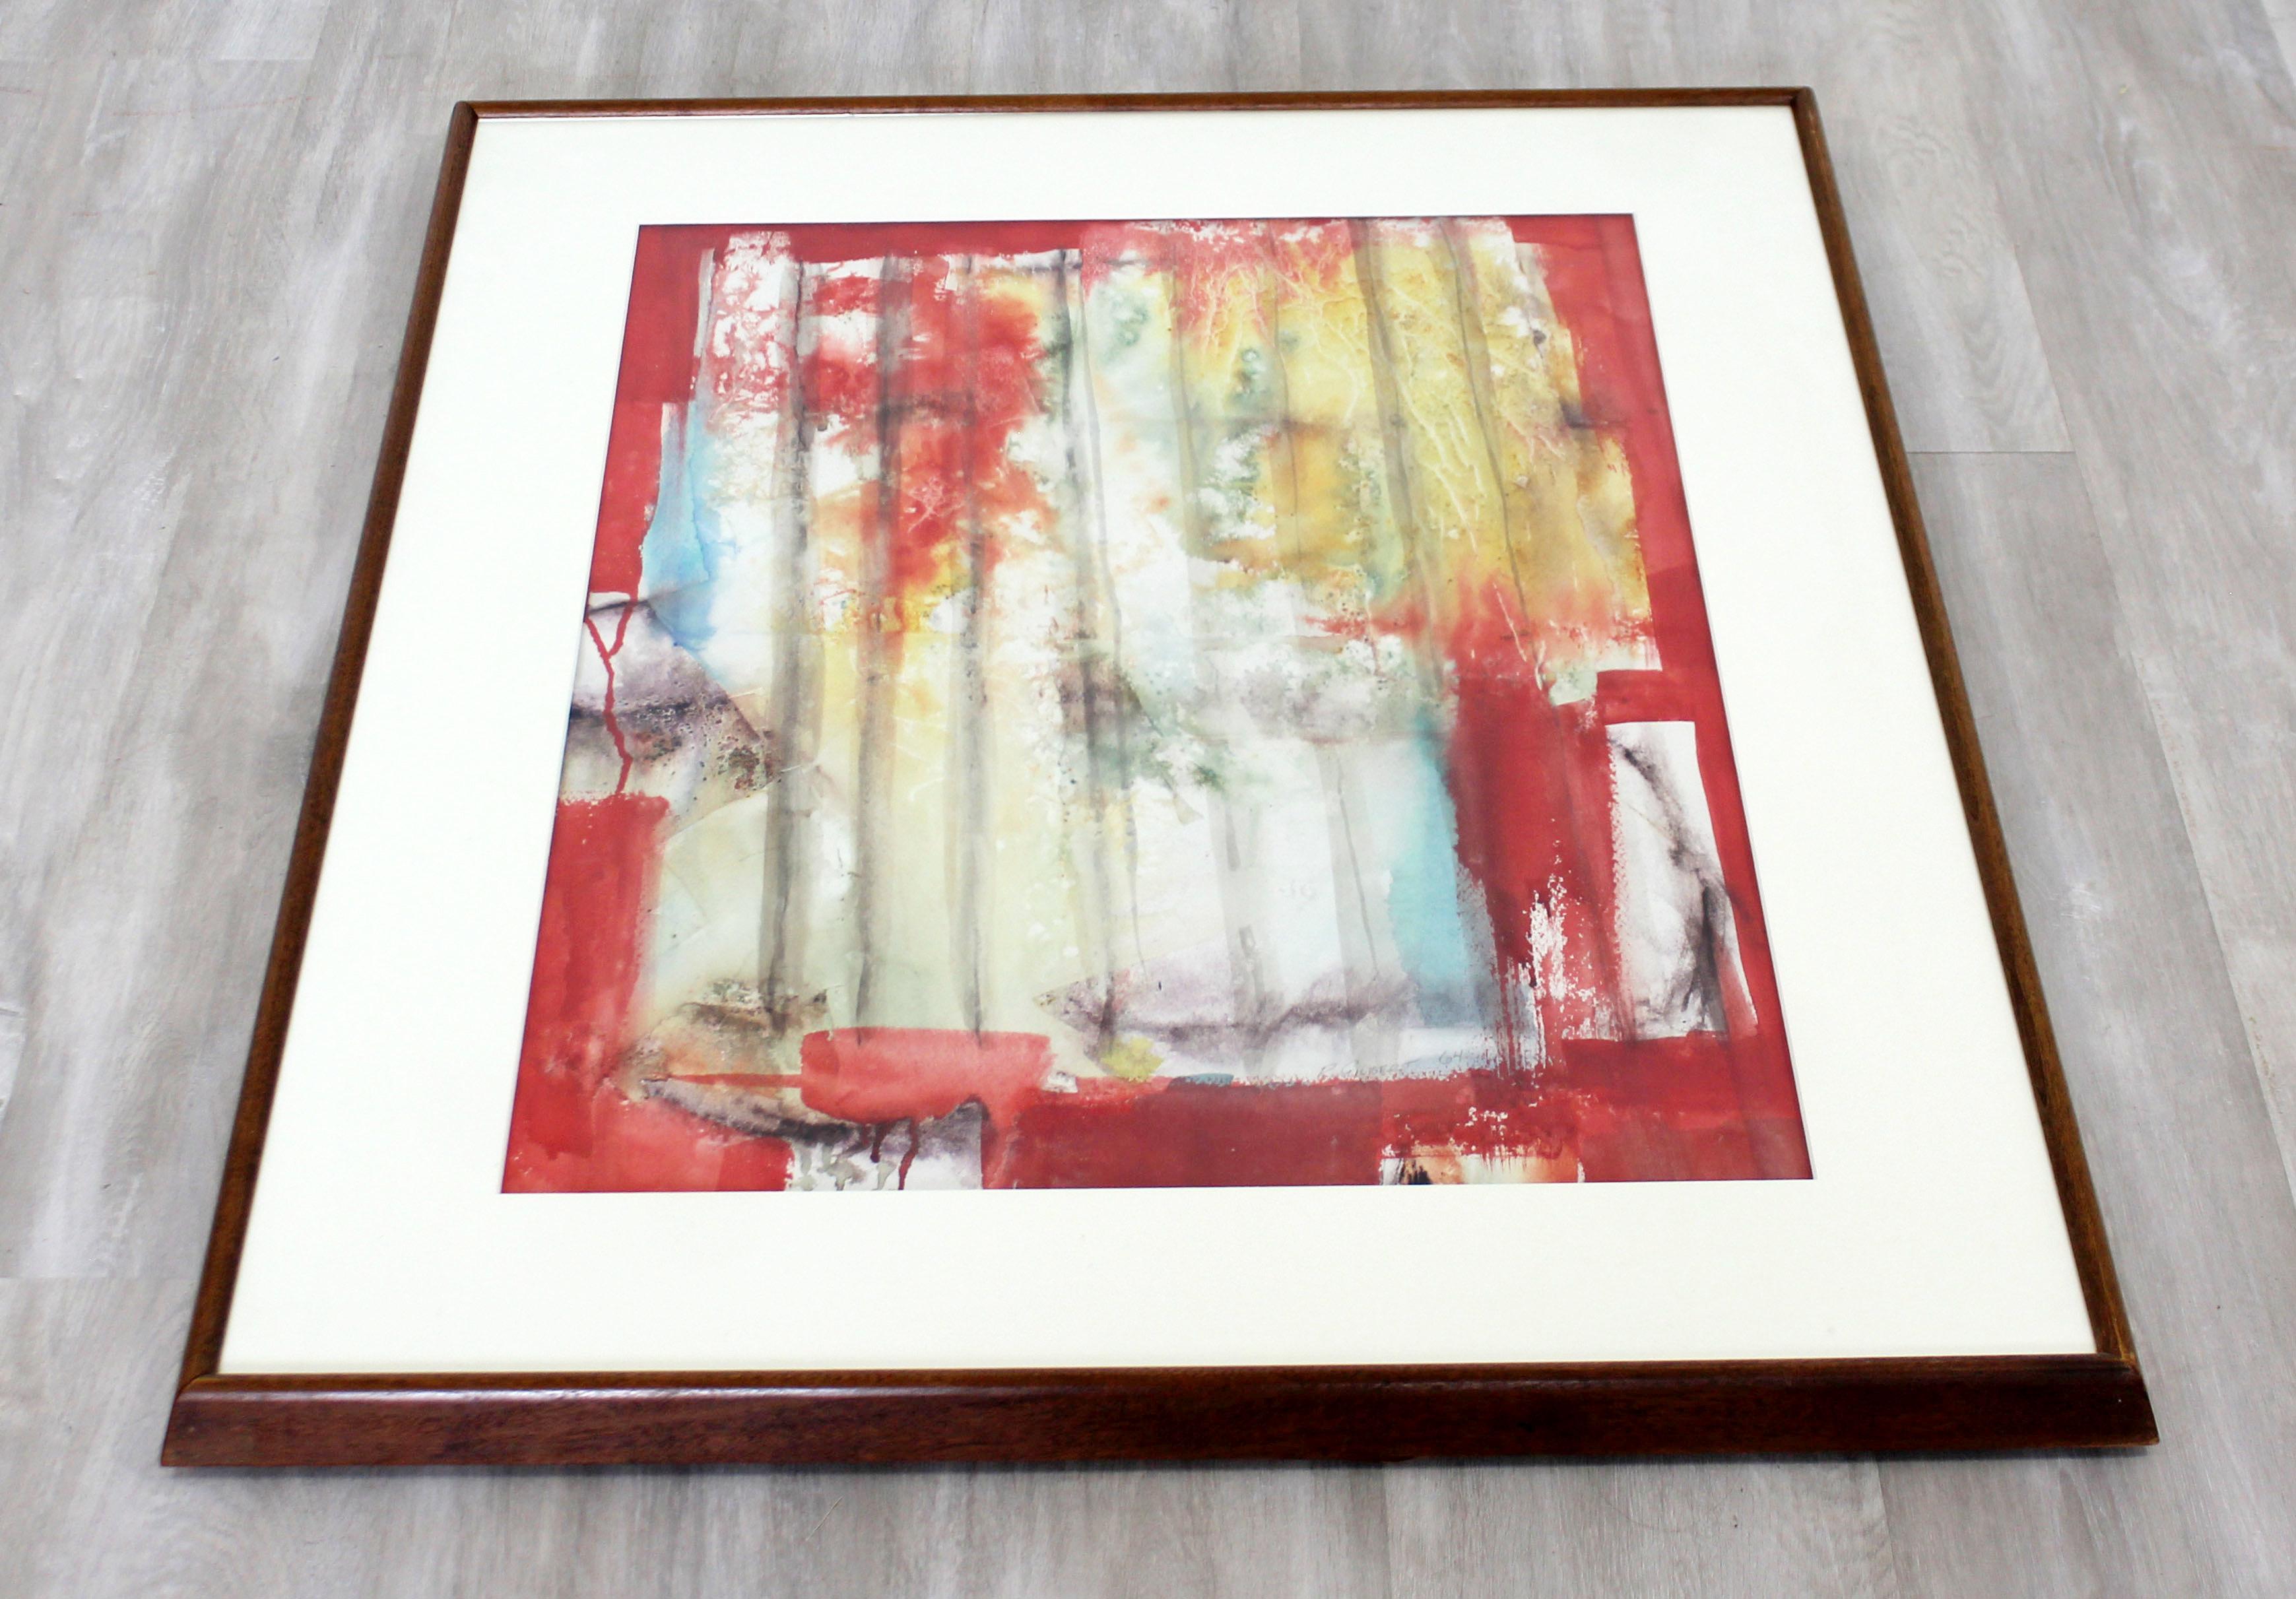 For your consideration is a gorgeous, framed, red abstract painting, signed R. Gilbert, dated 1964. In excellent condition. The dimensions of the frame are 30